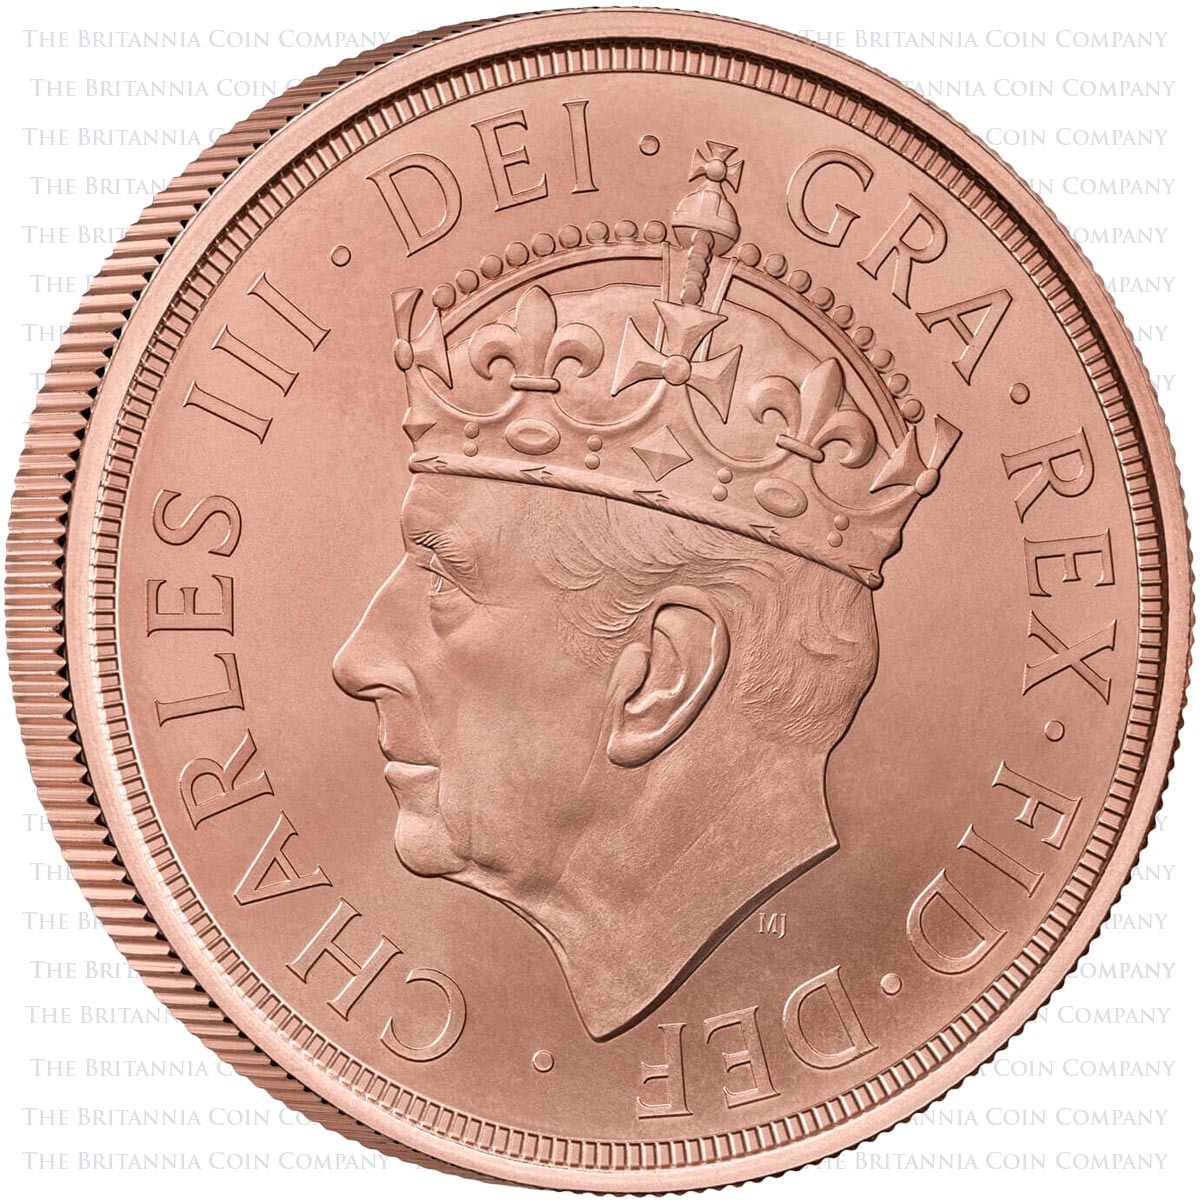 CA23 2023 King Charles III Gold Brilliant Uncirculated Five Pound Quintuple Sovereign Coronation Obverse